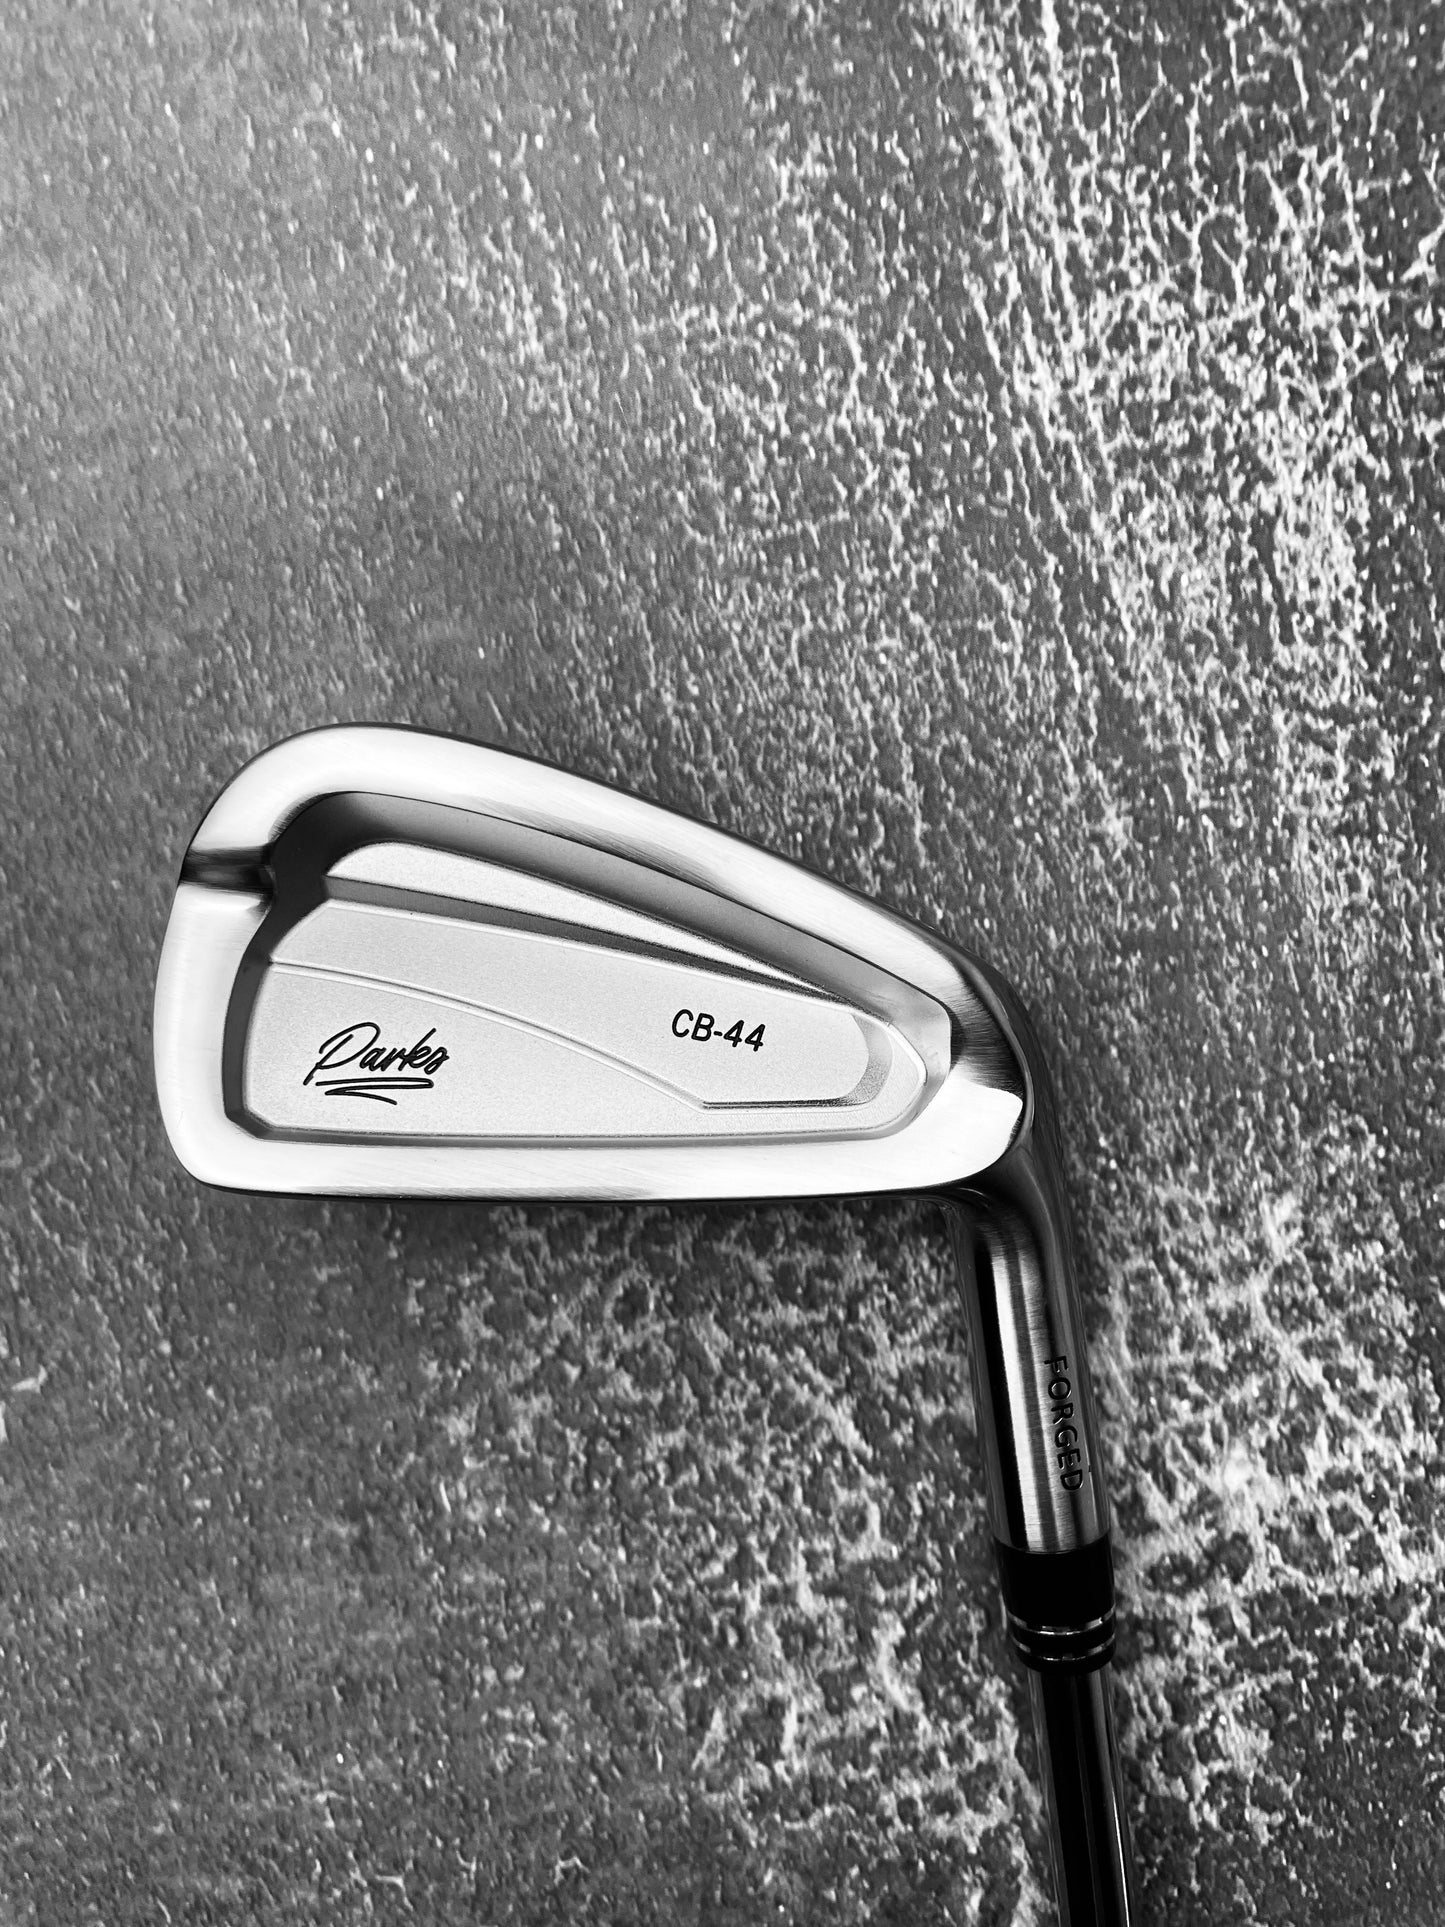 CB-44 Forged Irons